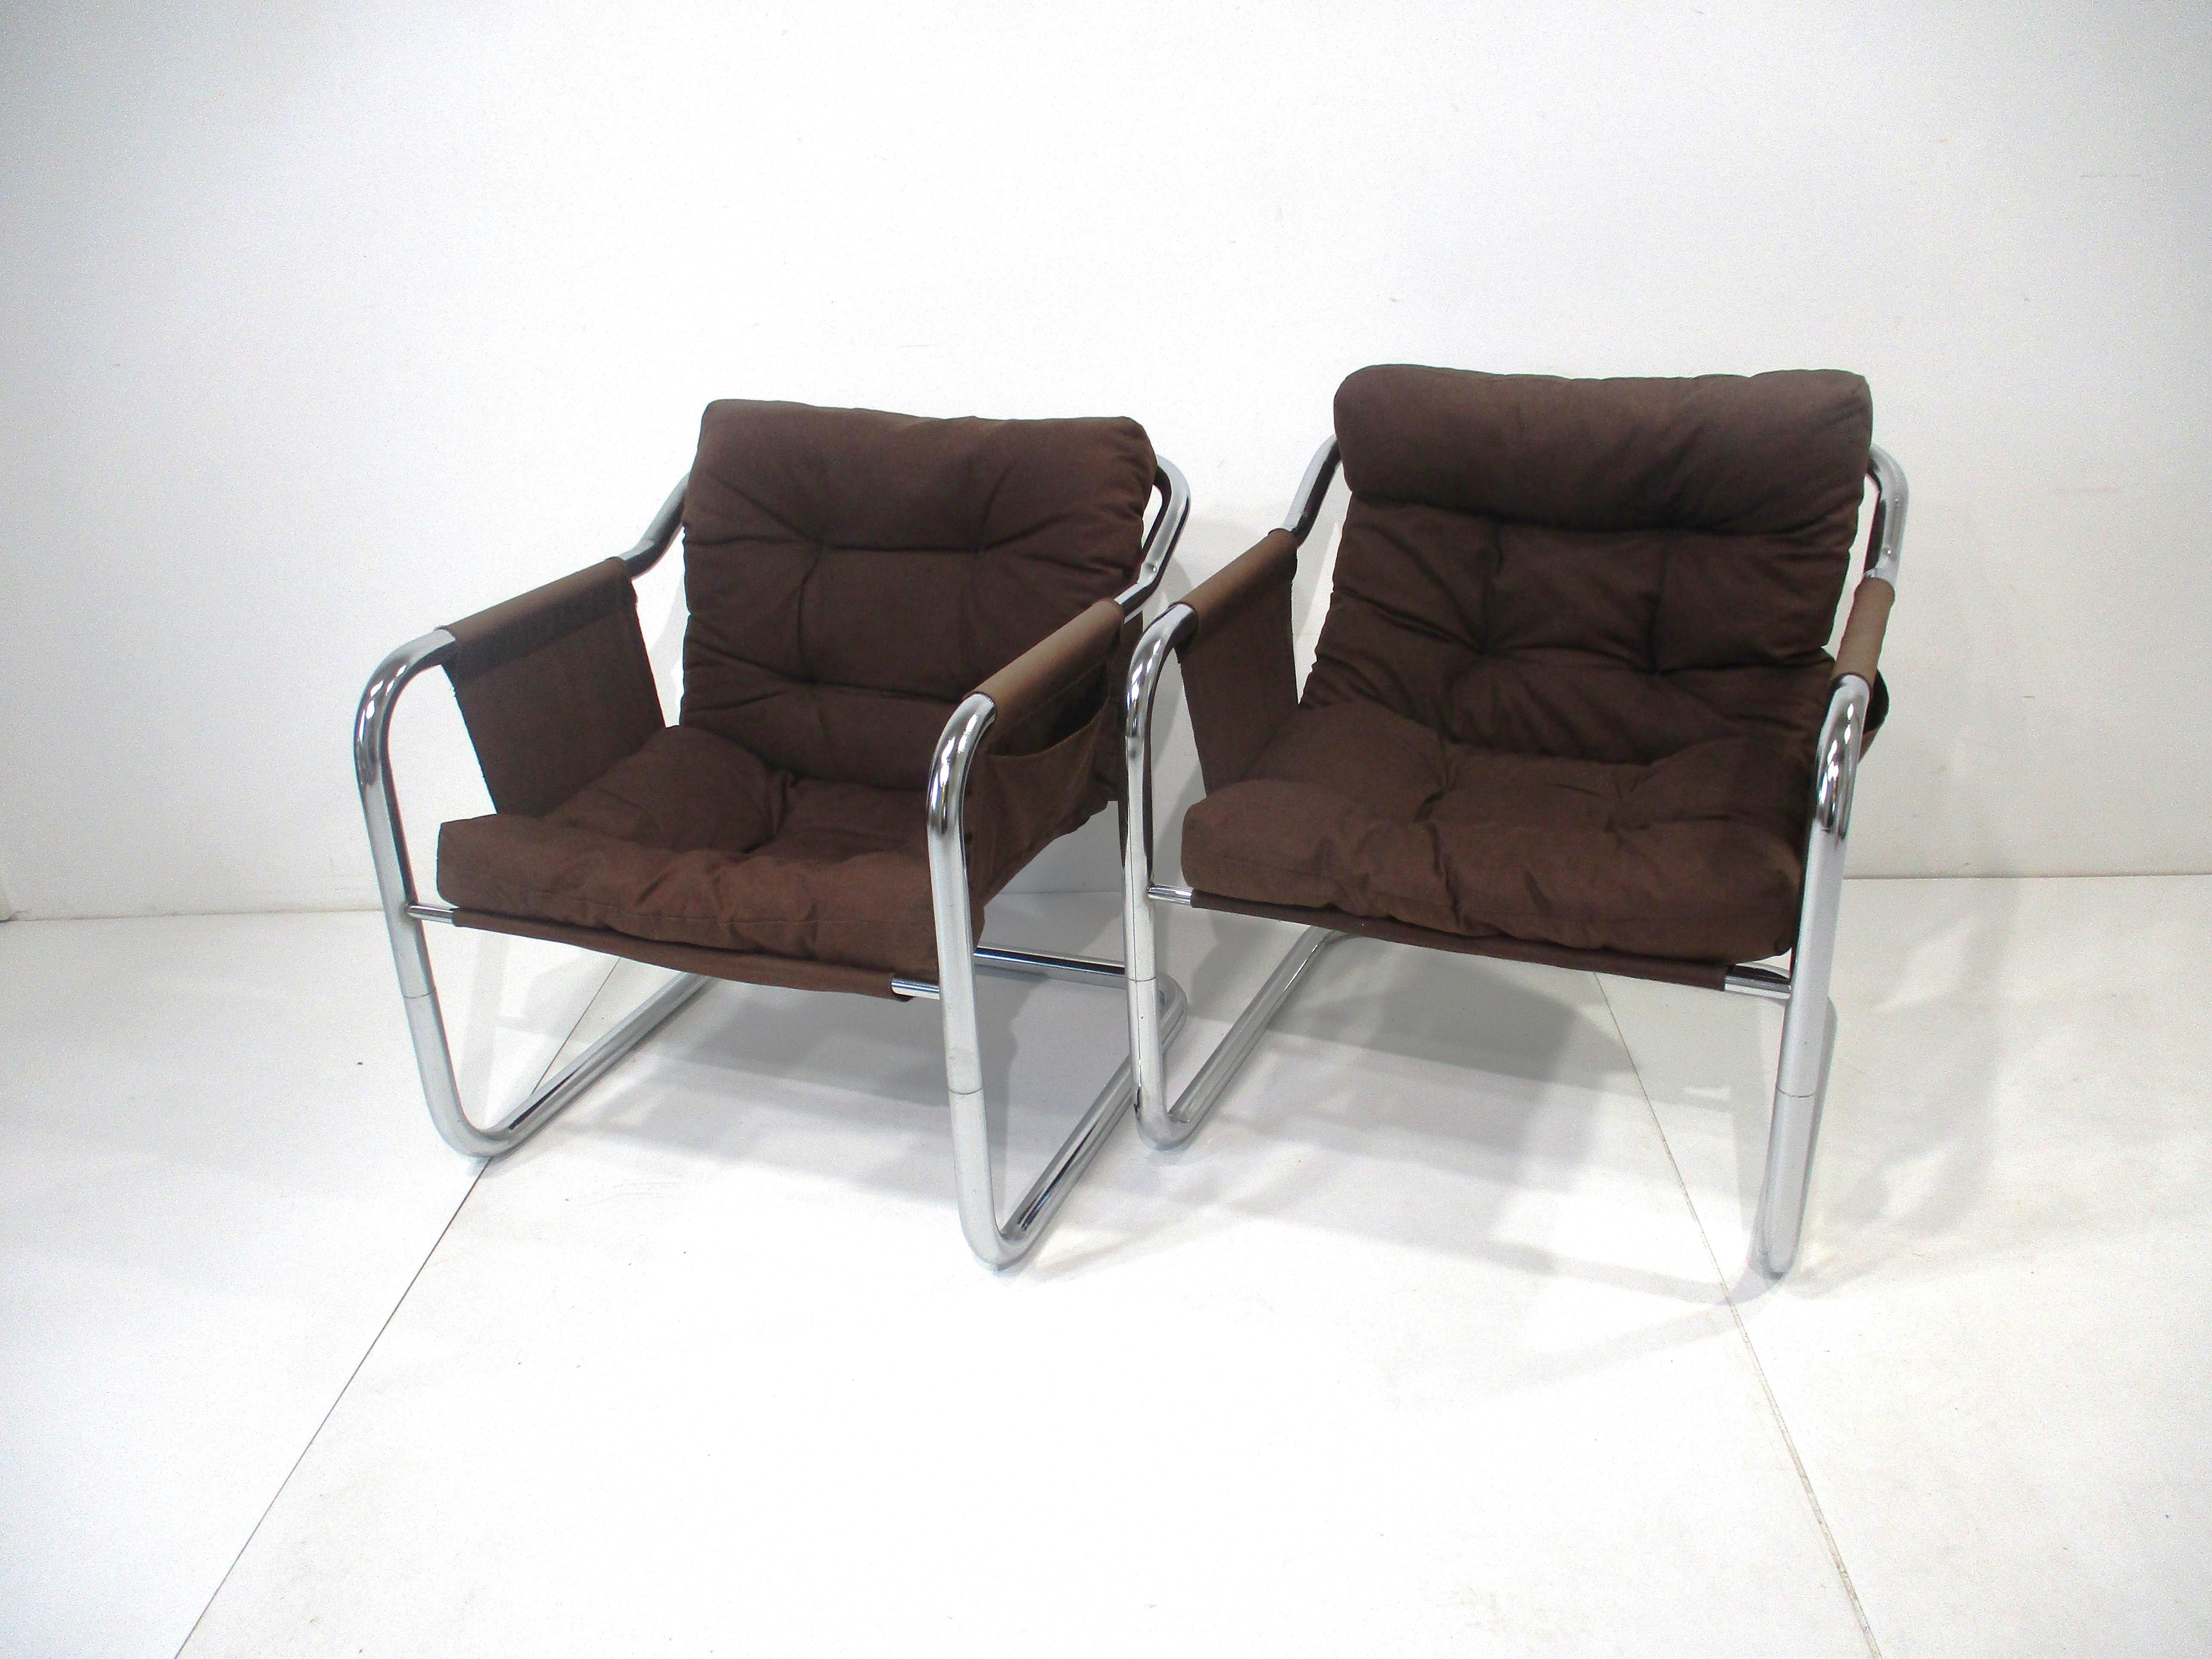 A pair of chromed steel sculptural tubed framed cantilevered lounge chairs with brown canvas styled sling and padded cushions . To each arm side there is a pouch for reading material or just for storage , retains the tag to one chair stating made in